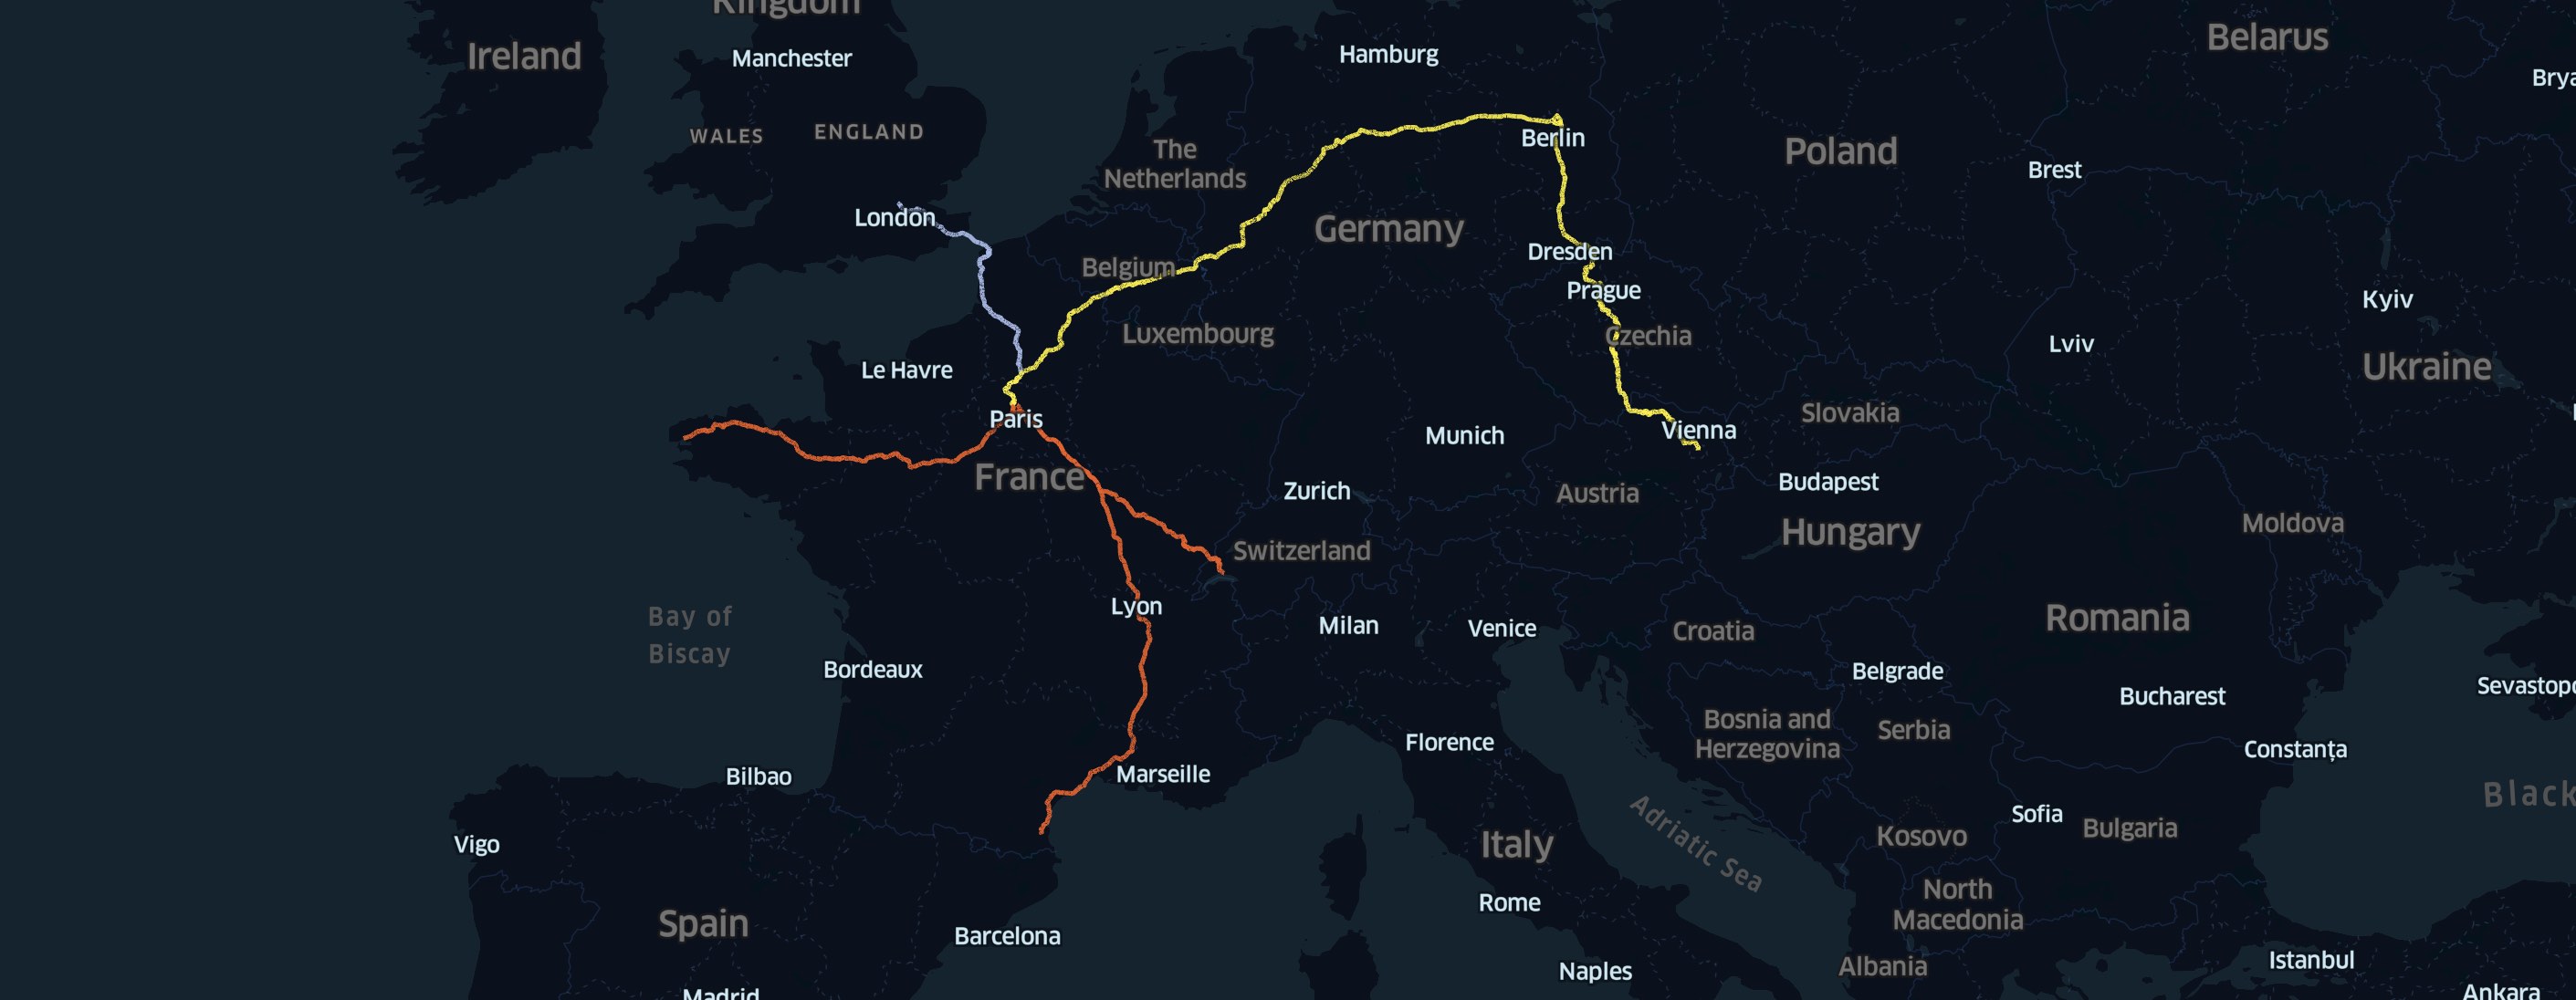 Europe Map with London - Paris - Berlin trains routes